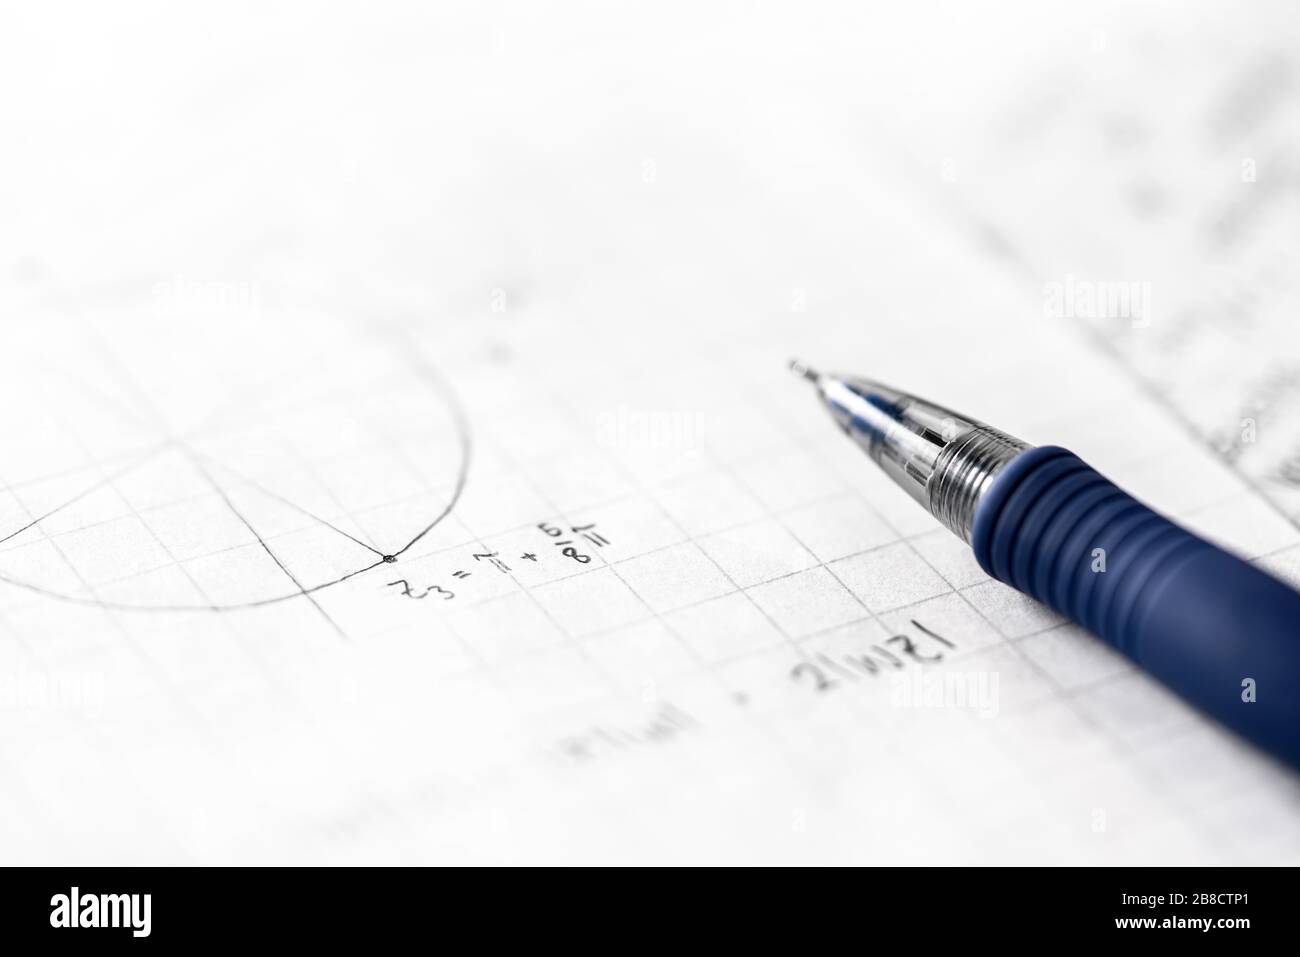 Studying mathematics and science concept. Notes in math class. Geometry, numbers, equation or formula on paper with pen. Homework, exam, assignment. Stock Photo